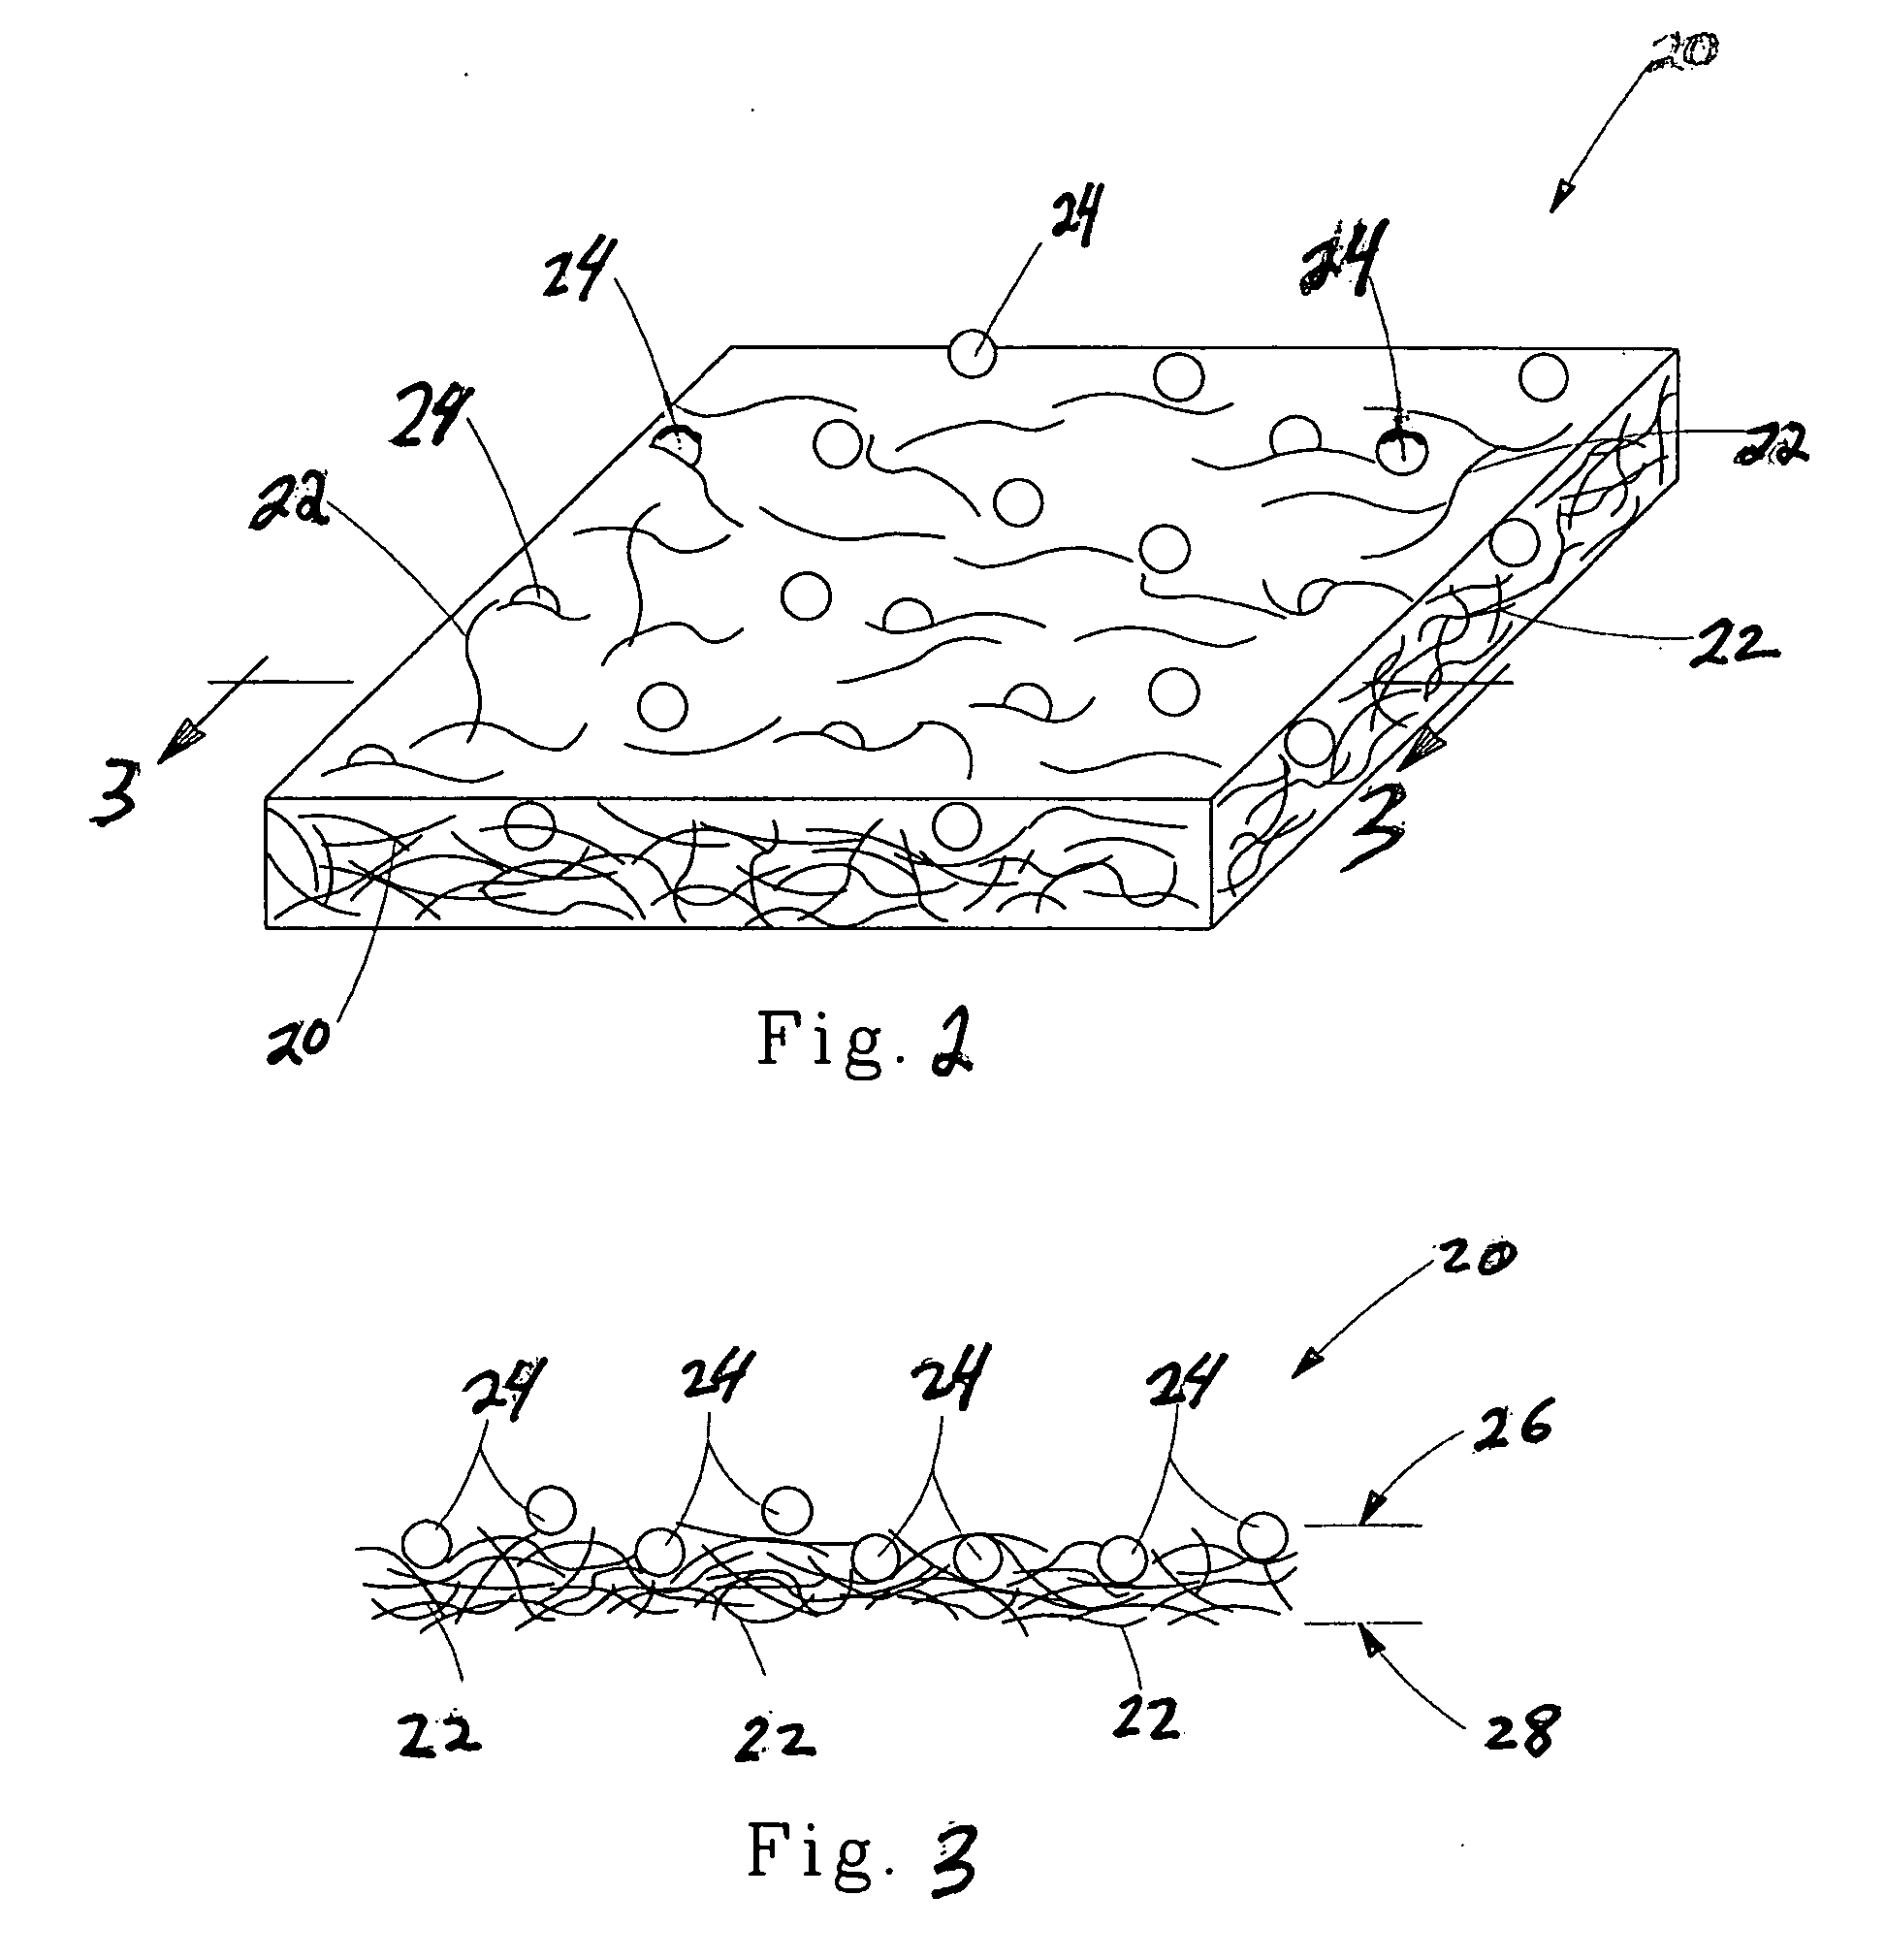 Hydroxyl polymer fiber fibrous structures and processes for making same